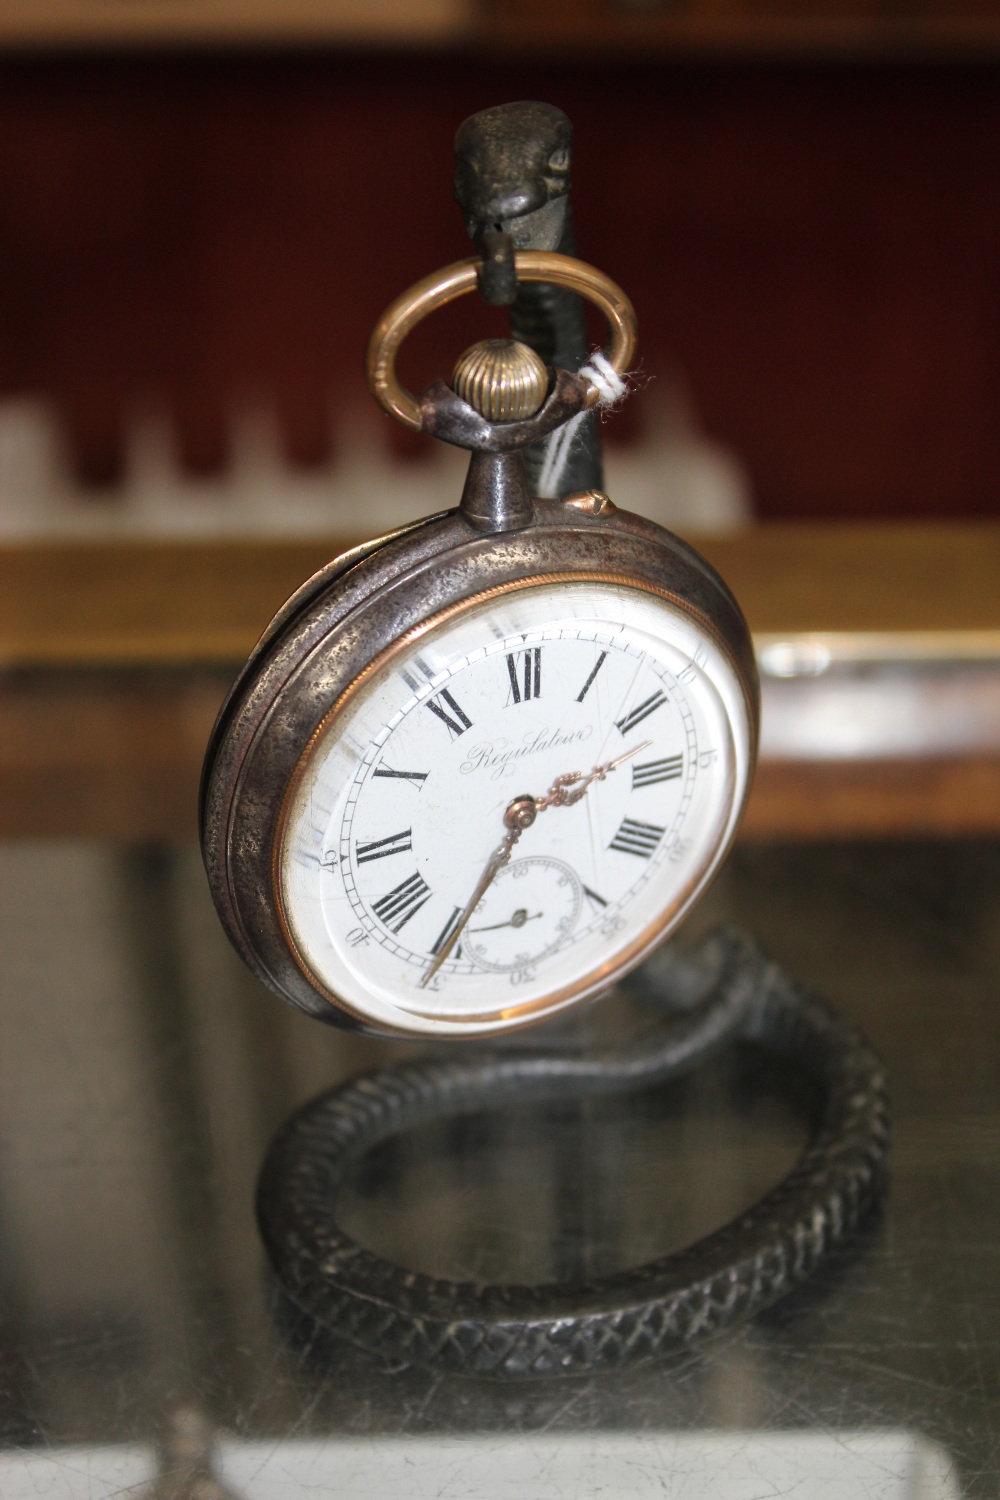 A CAST METAL WATCH STAND in the form of a snake holding an old pocket watch with steel case, the